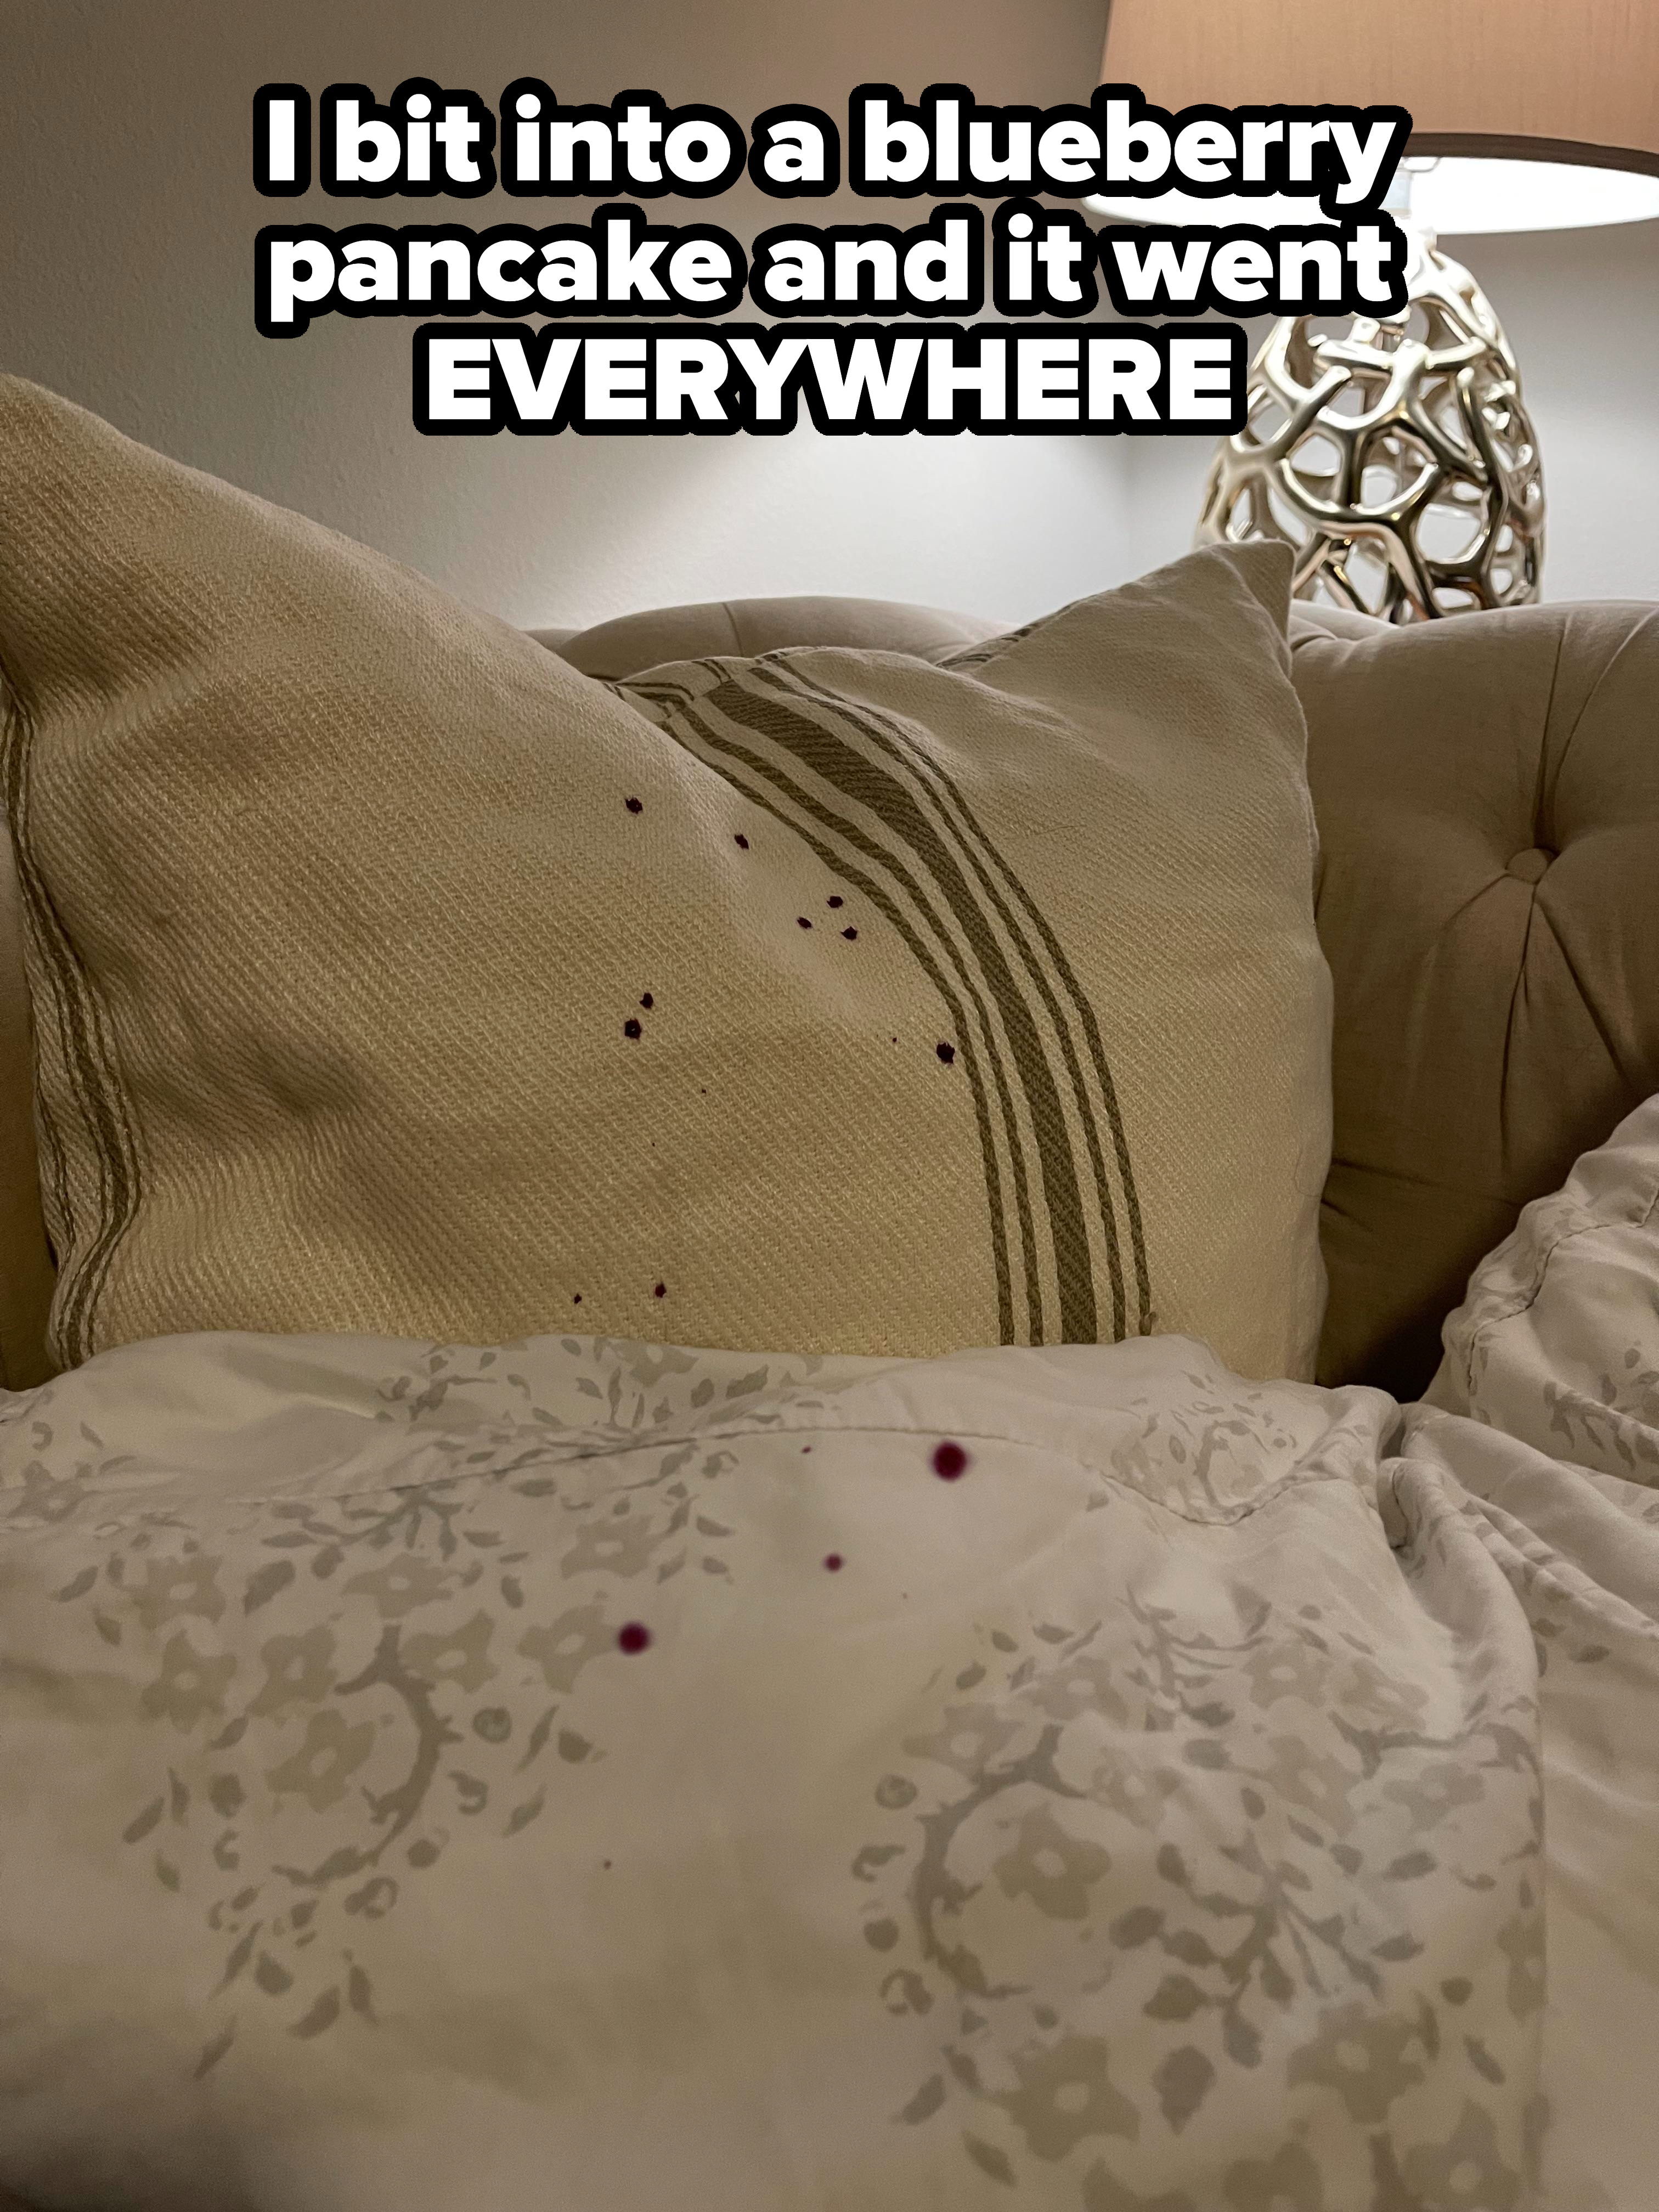 A close-up of a beige sofa with pillows and blueberry pieces/stains all over it